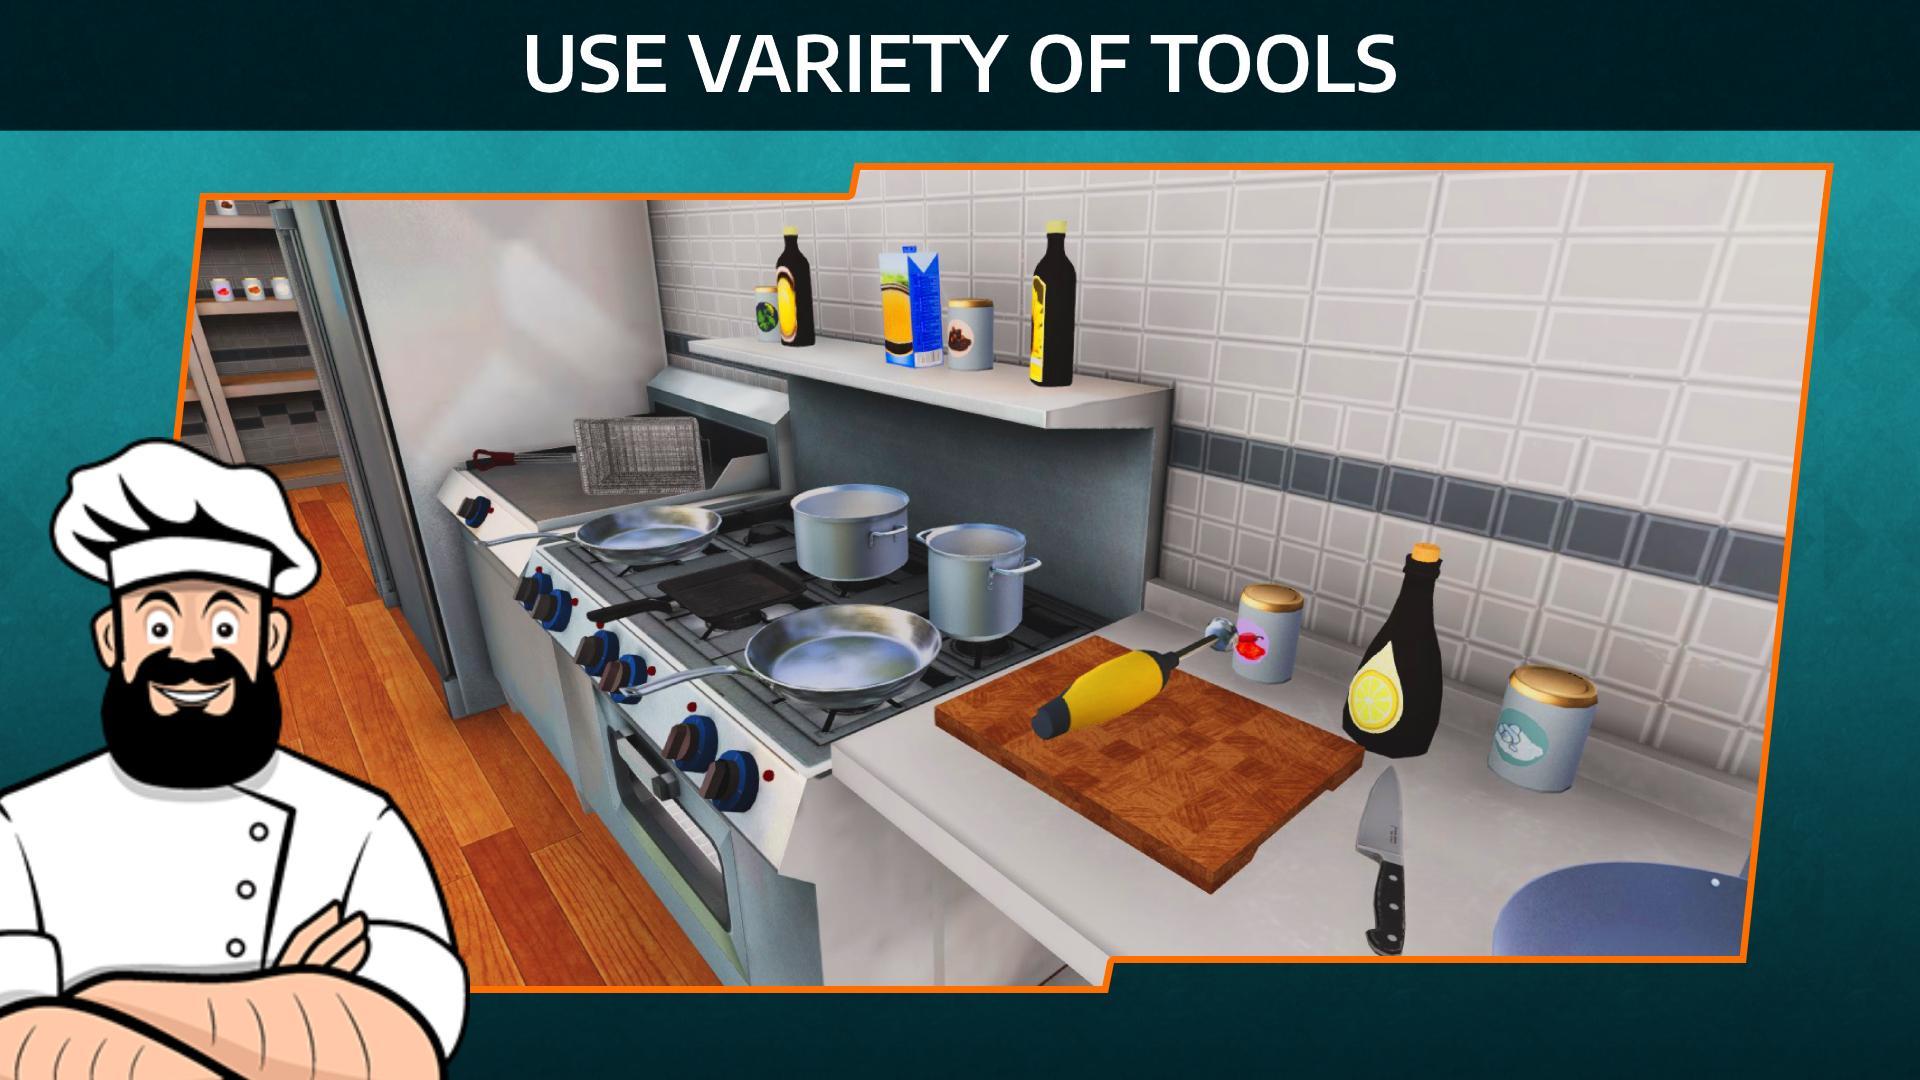 Cooking Simulator Mobile: Kitc android iOS apk download for free